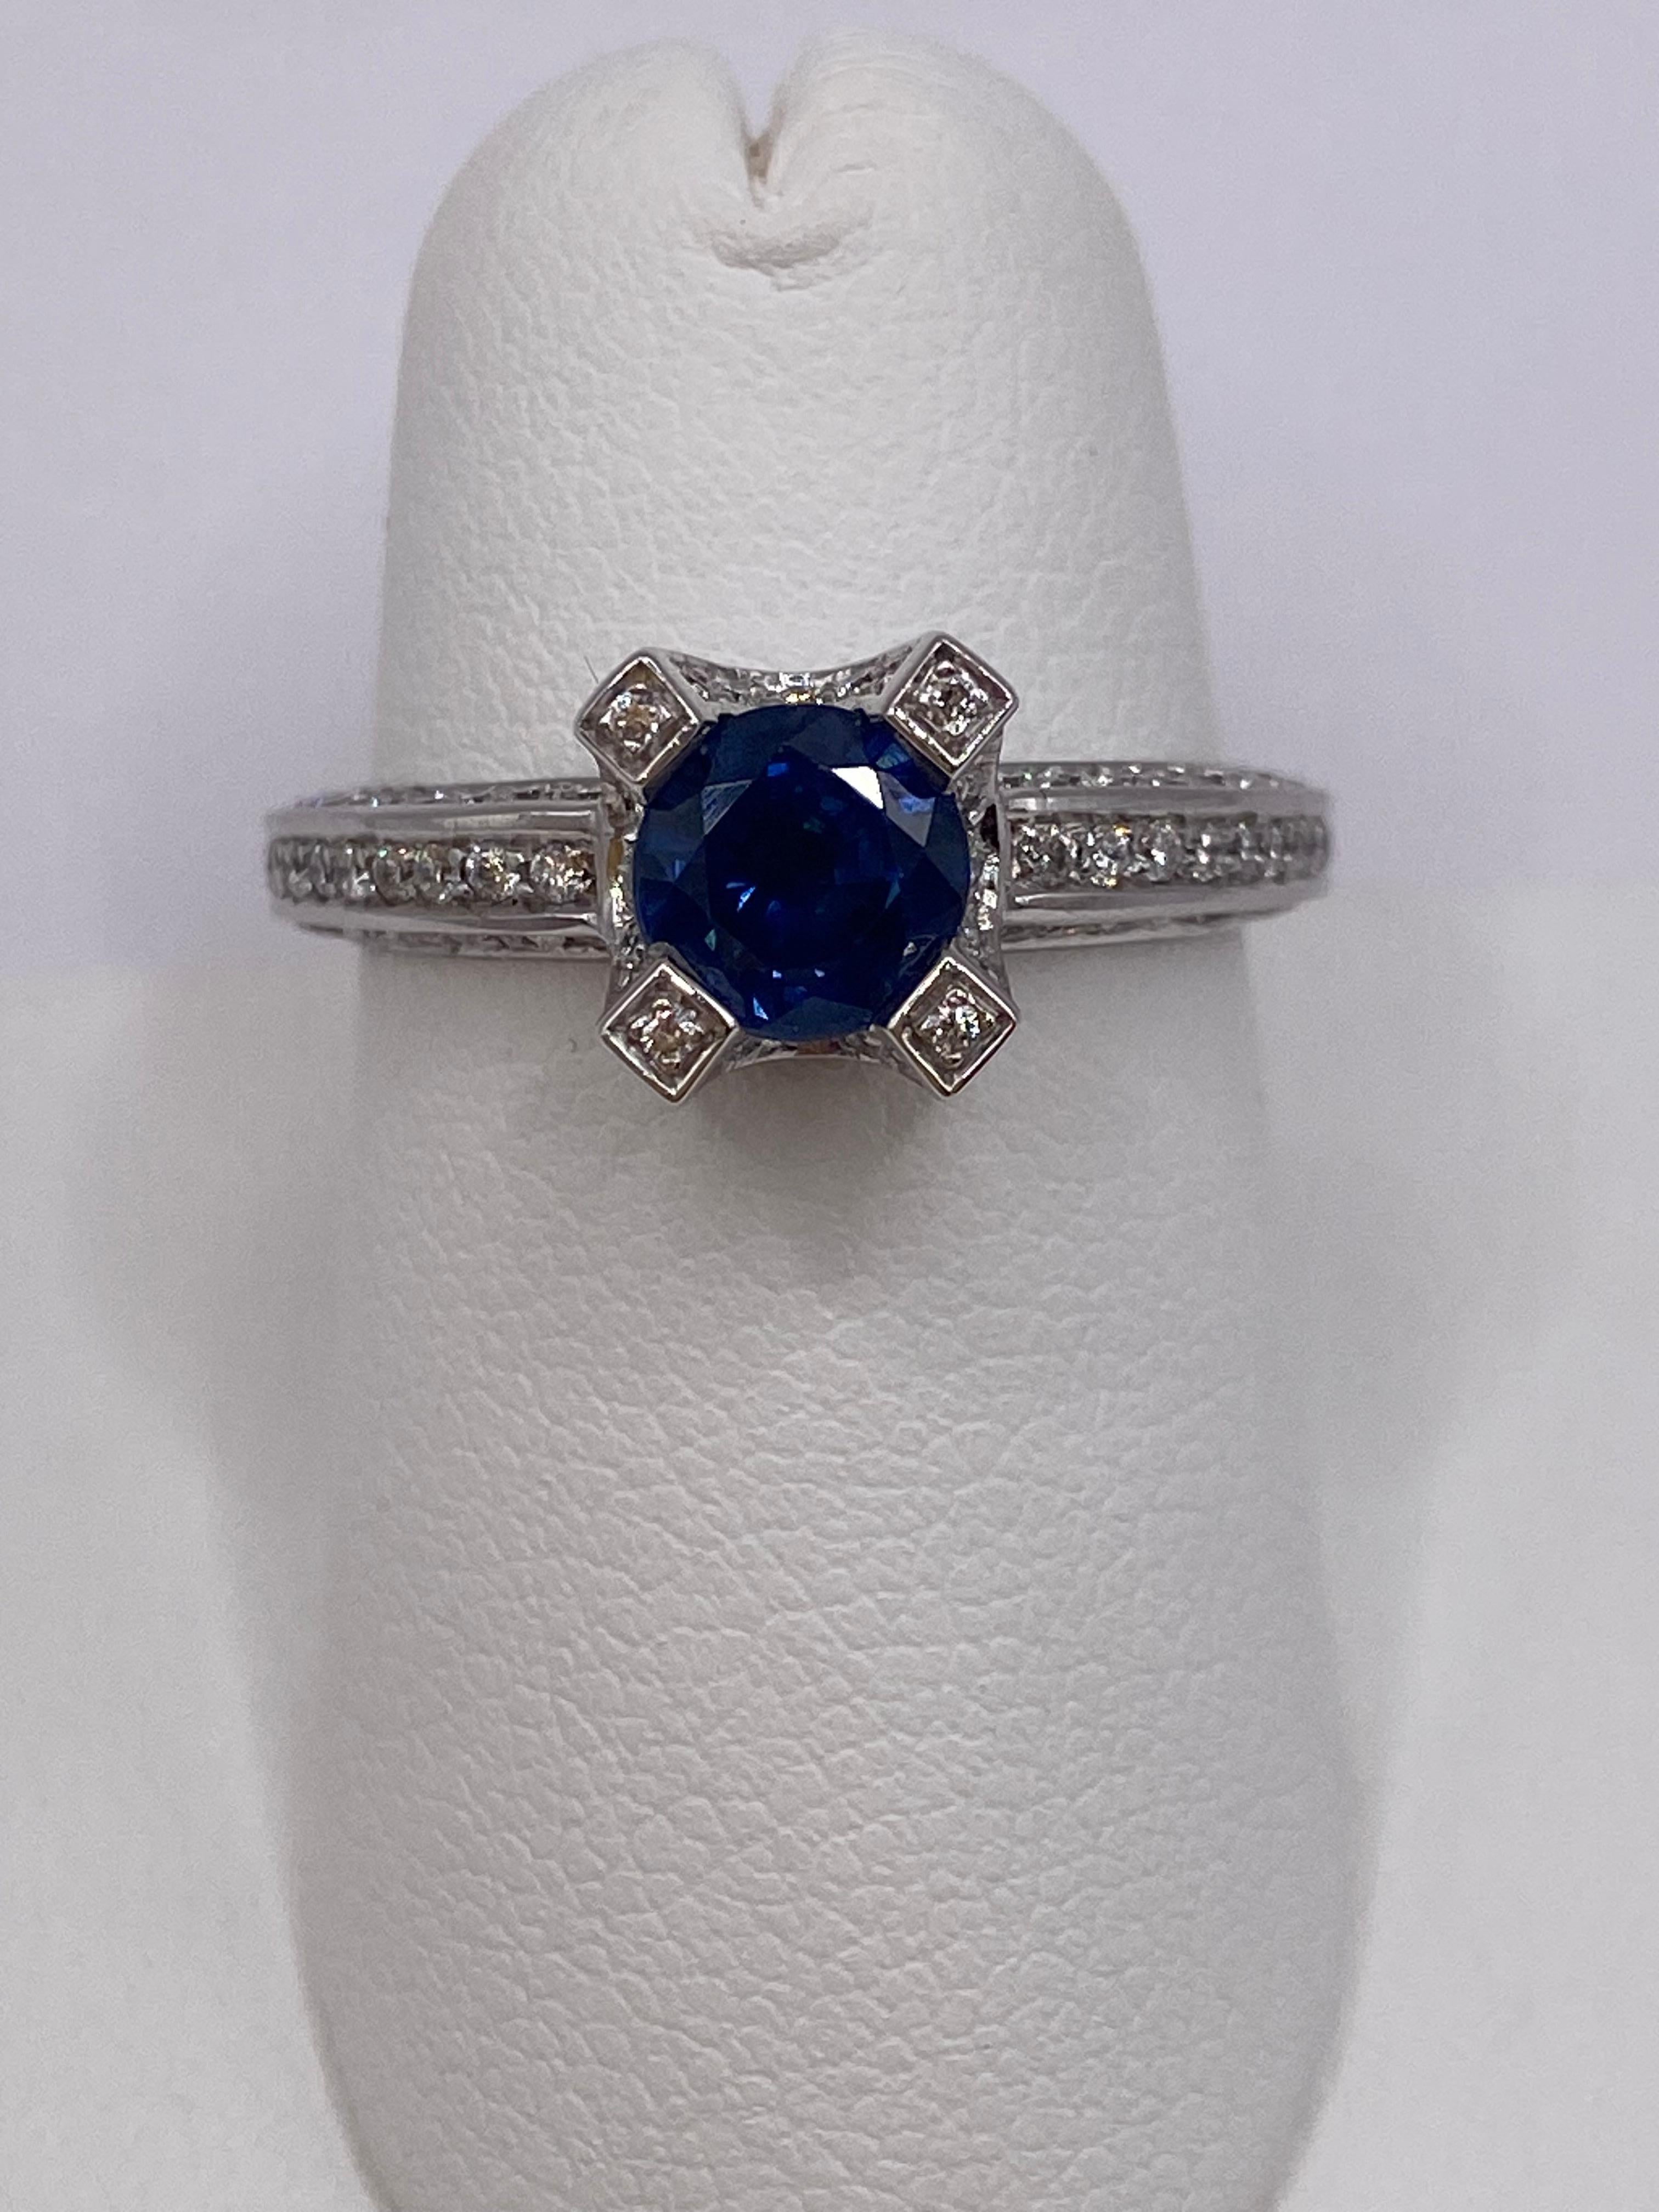 Metal: 14KT White Gold
Ring Size: 6.75
(Ring is size 6.75, but sizable upon request)

Number of Round Sapphires: 1
Carat Weight: 1.10ctw
Stone Size: 5.9mm

Number of Round Diamonds: 96
Carat Weight: 0.63ctw